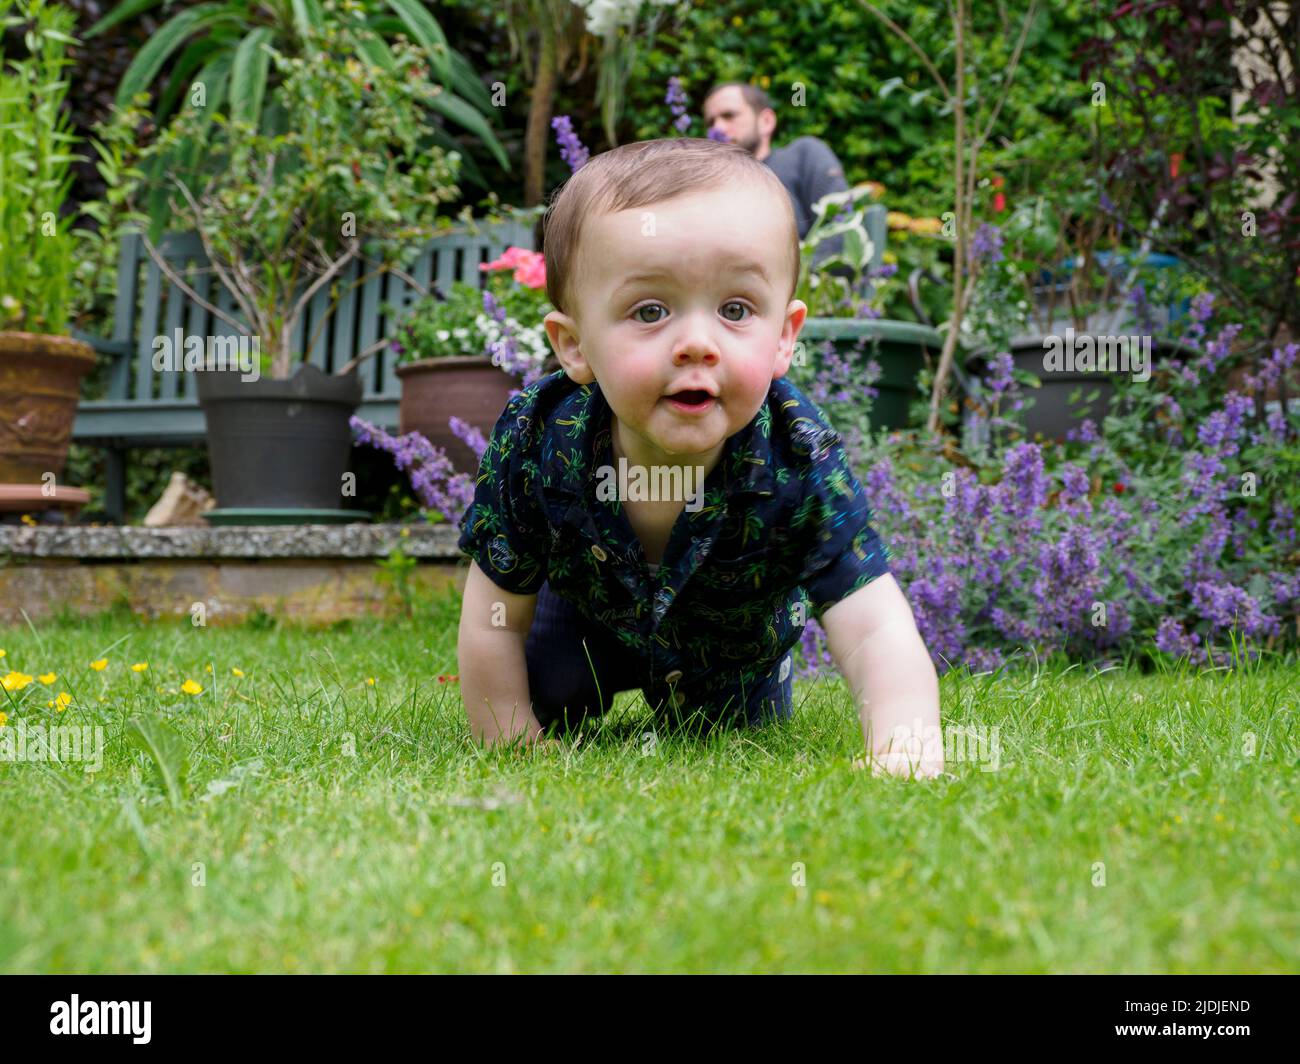 Toddler crawling on the grass in the garden, UK Stock Photo